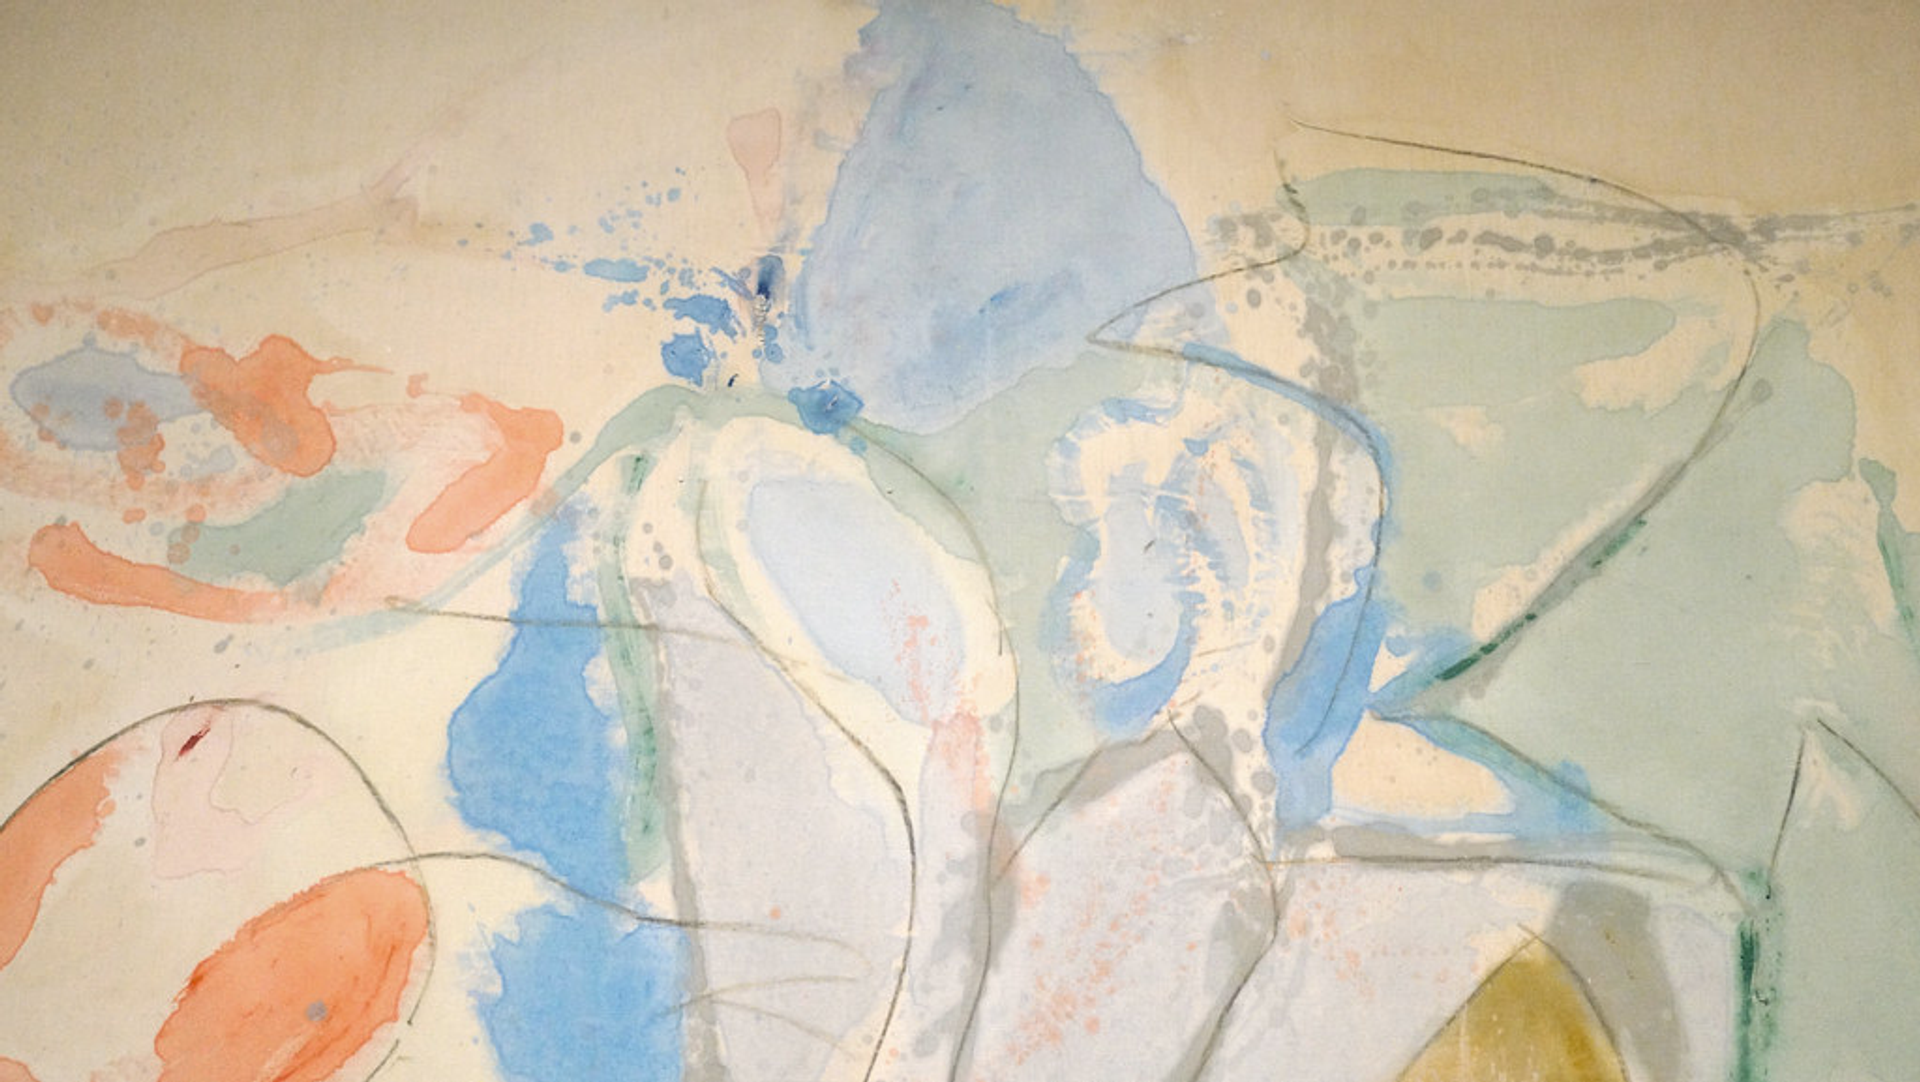 A detailed close up of Helen Frankenthaler’s Mountains and Sea. An abstract expressionist painting including blue, orange, pink, and yellow hues.